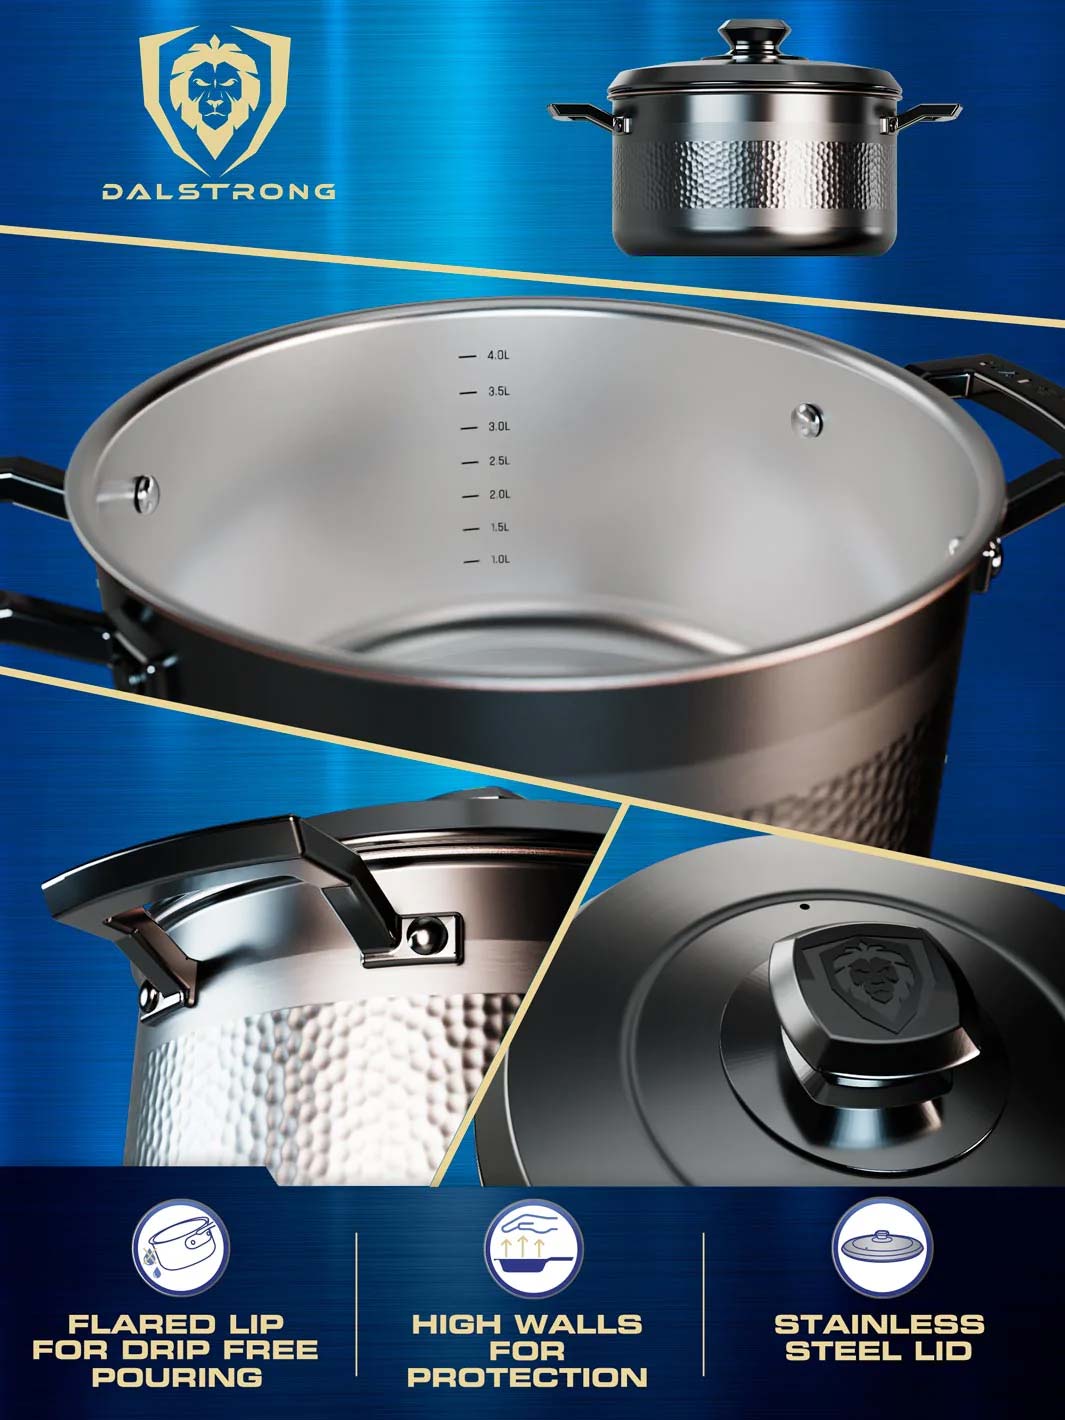 Dalstrong avalon series 5 quart stock pot hammered finish black showcasing it's high walls and stainless steel lid.